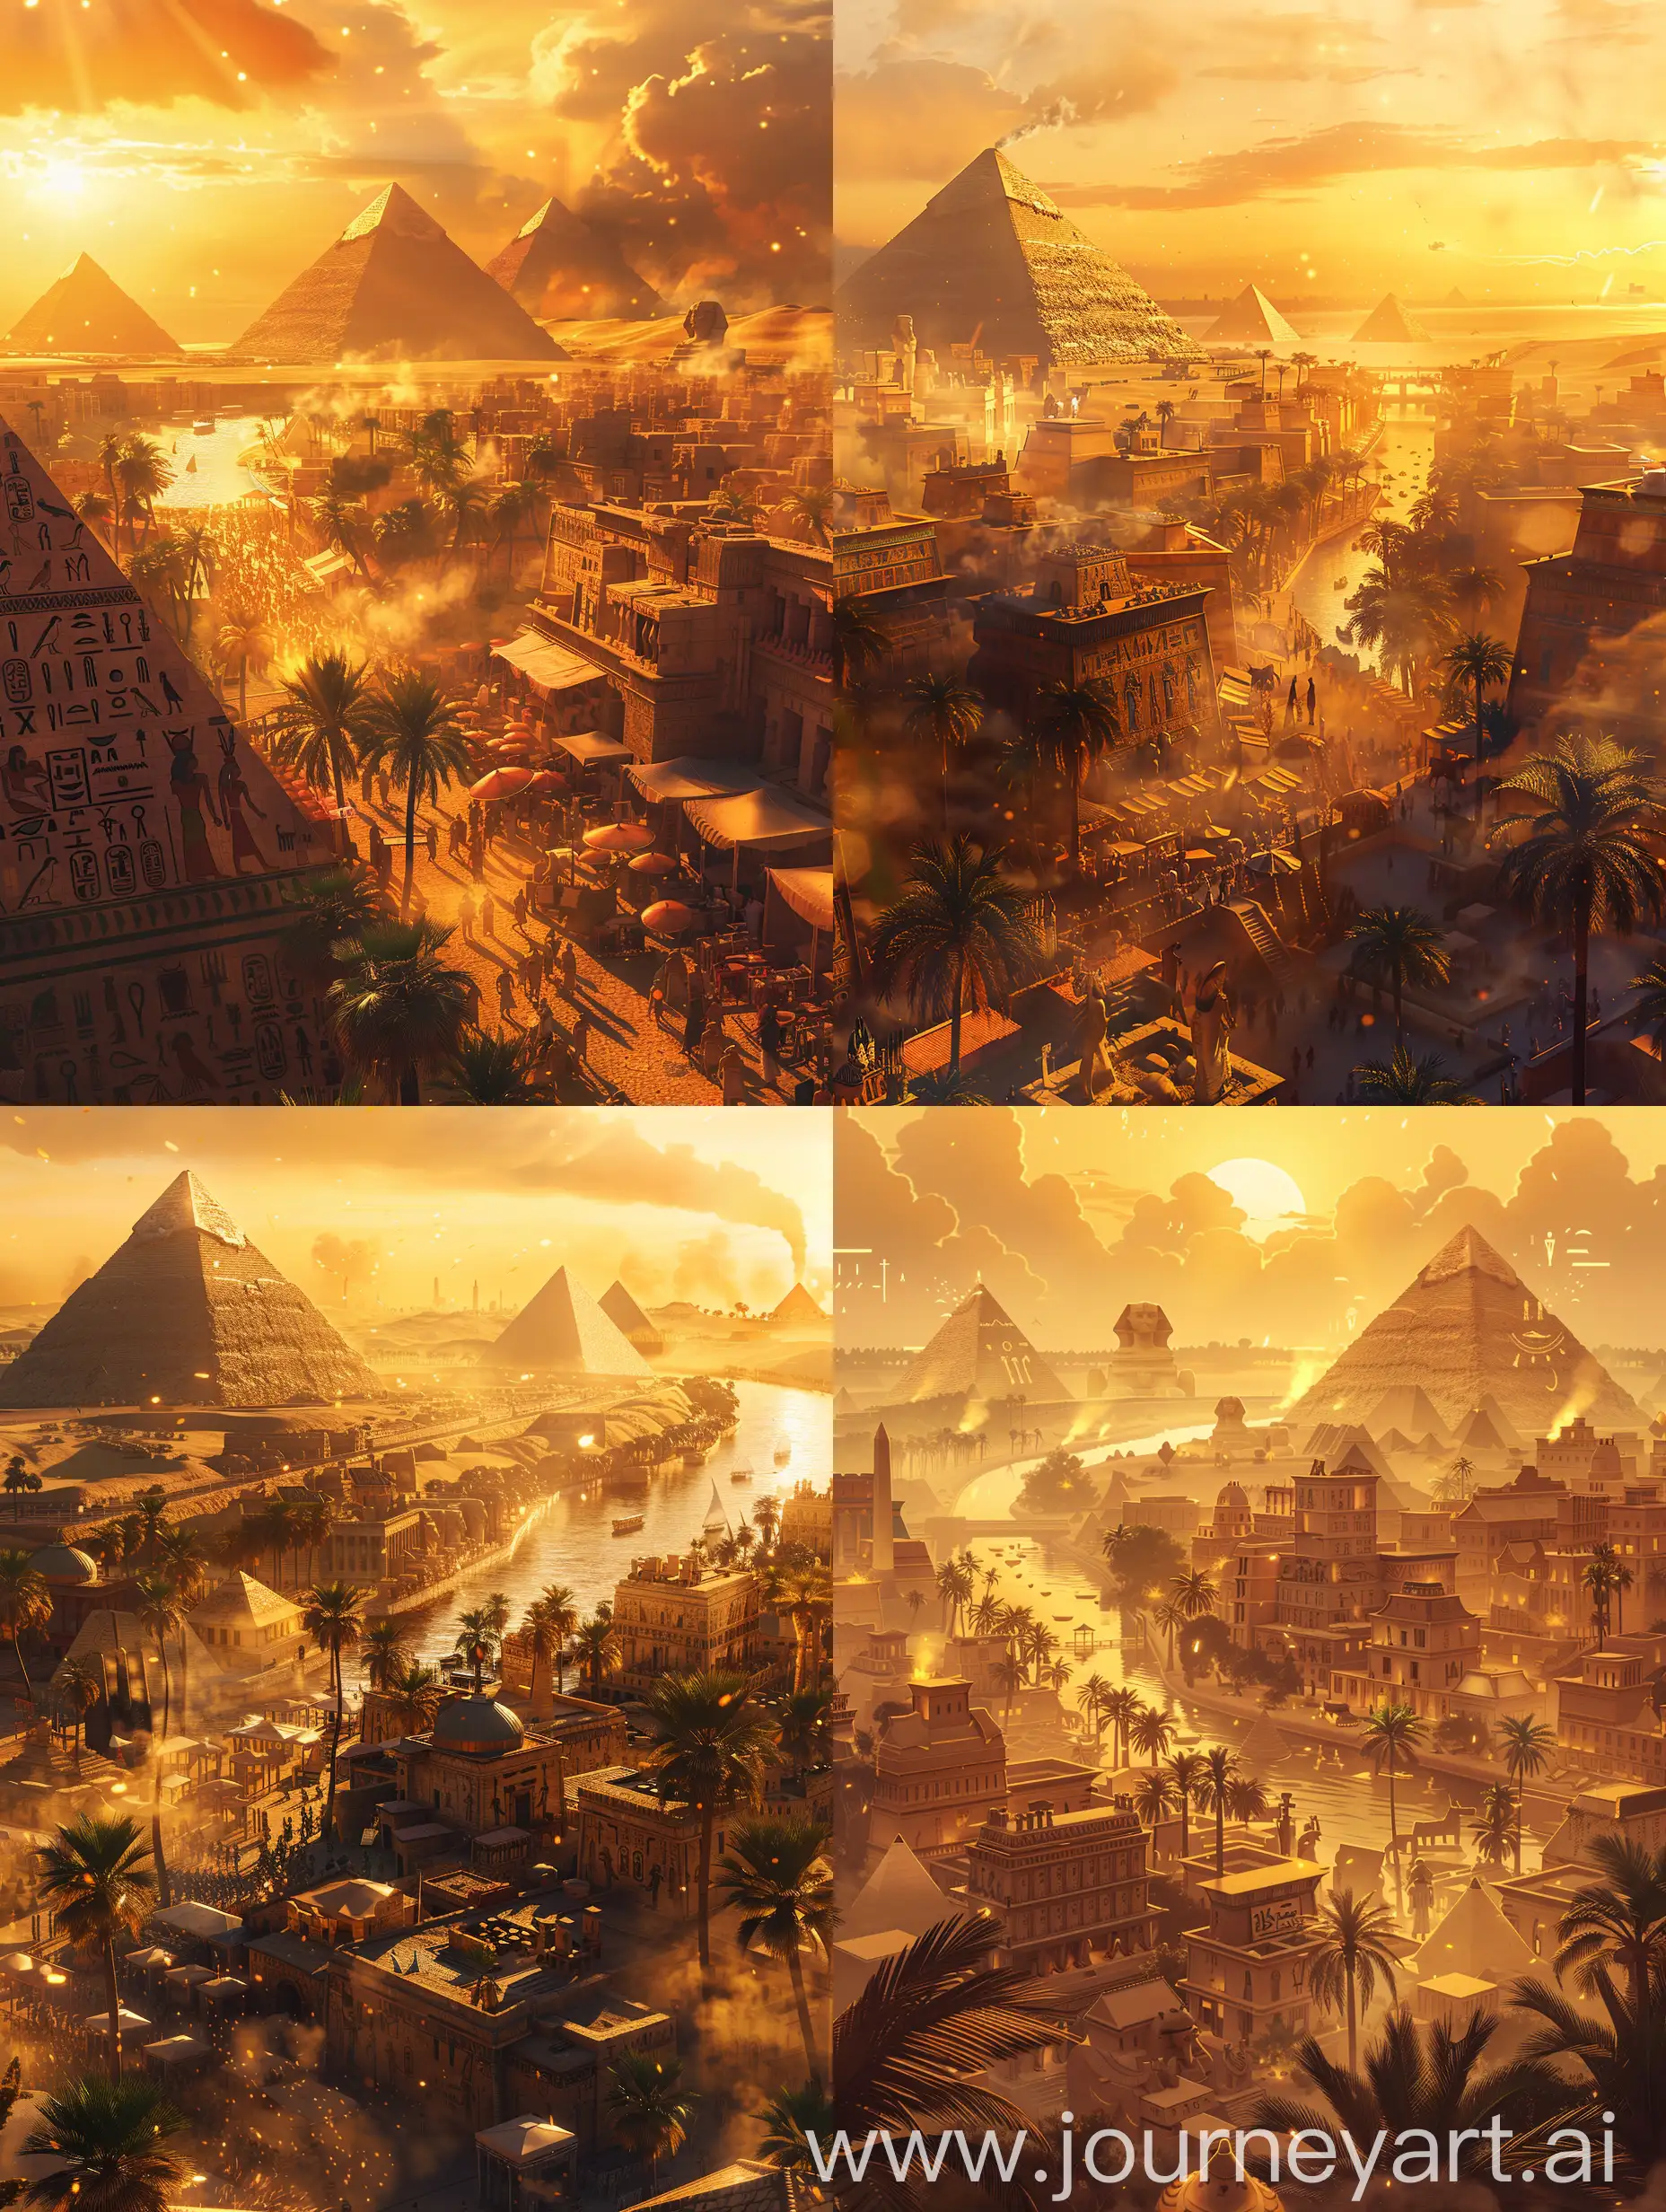 Ancient-Egyptian-Cityscape-at-Sunset-HyperRealistic-Illustration-with-Pyramids-Hieroglyphics-and-Nile-River